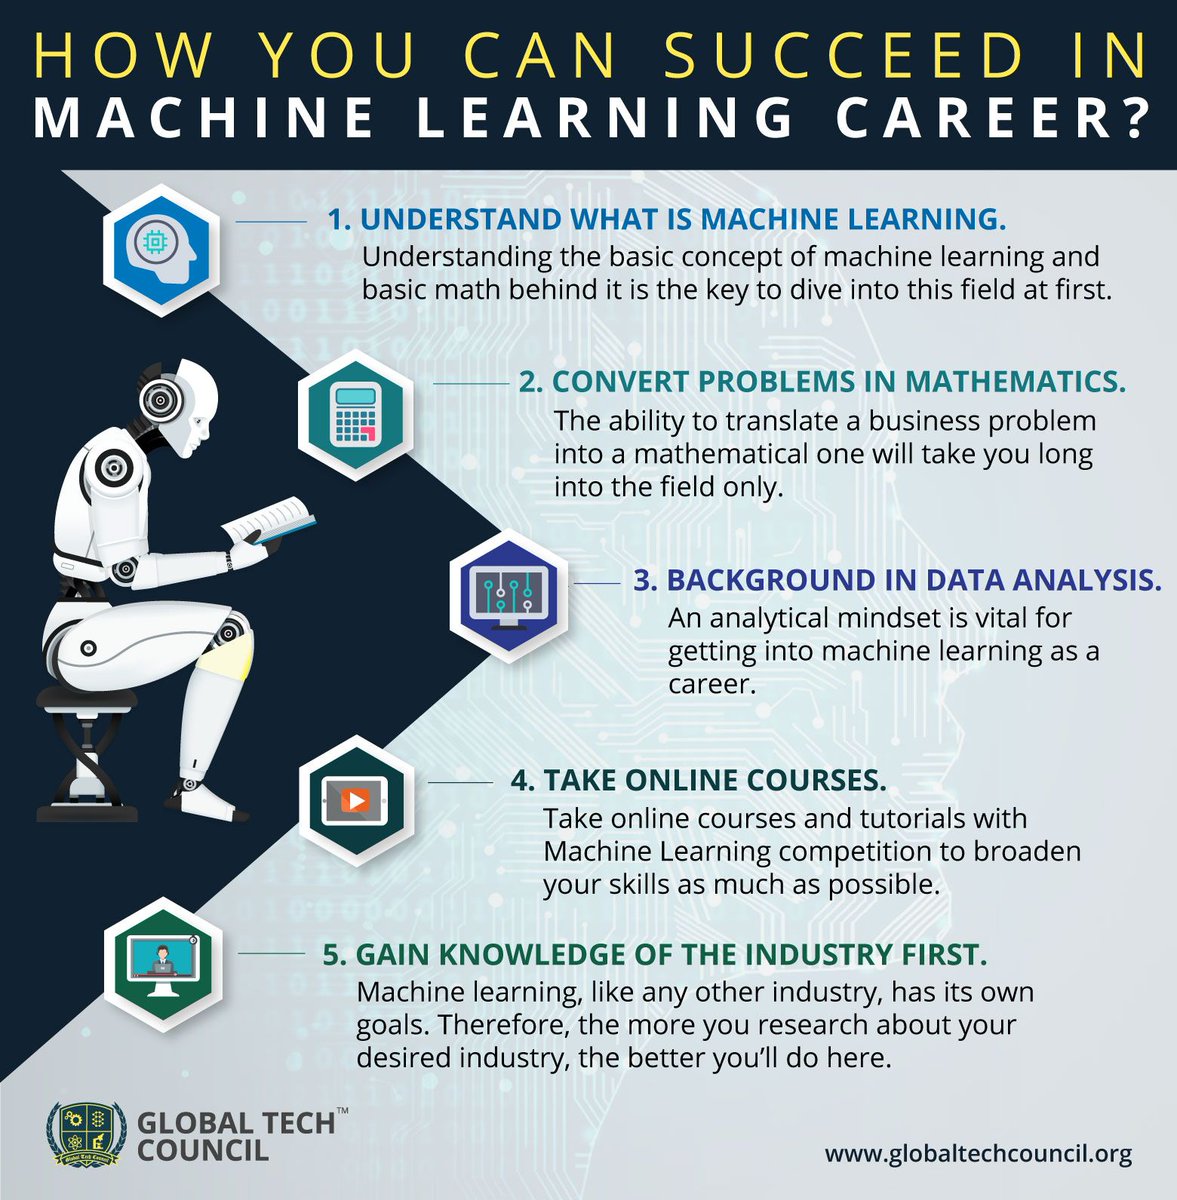 Demand for Machine Learning Engineers is going to keep increasing exponentially. Here are 5 skills you need to succeed in the incredibly exciting field. 
#MachineLearning #Career #CareerInMachineLearning #Technology #Jobs #MachineLearningEngineers #LearnTechnology